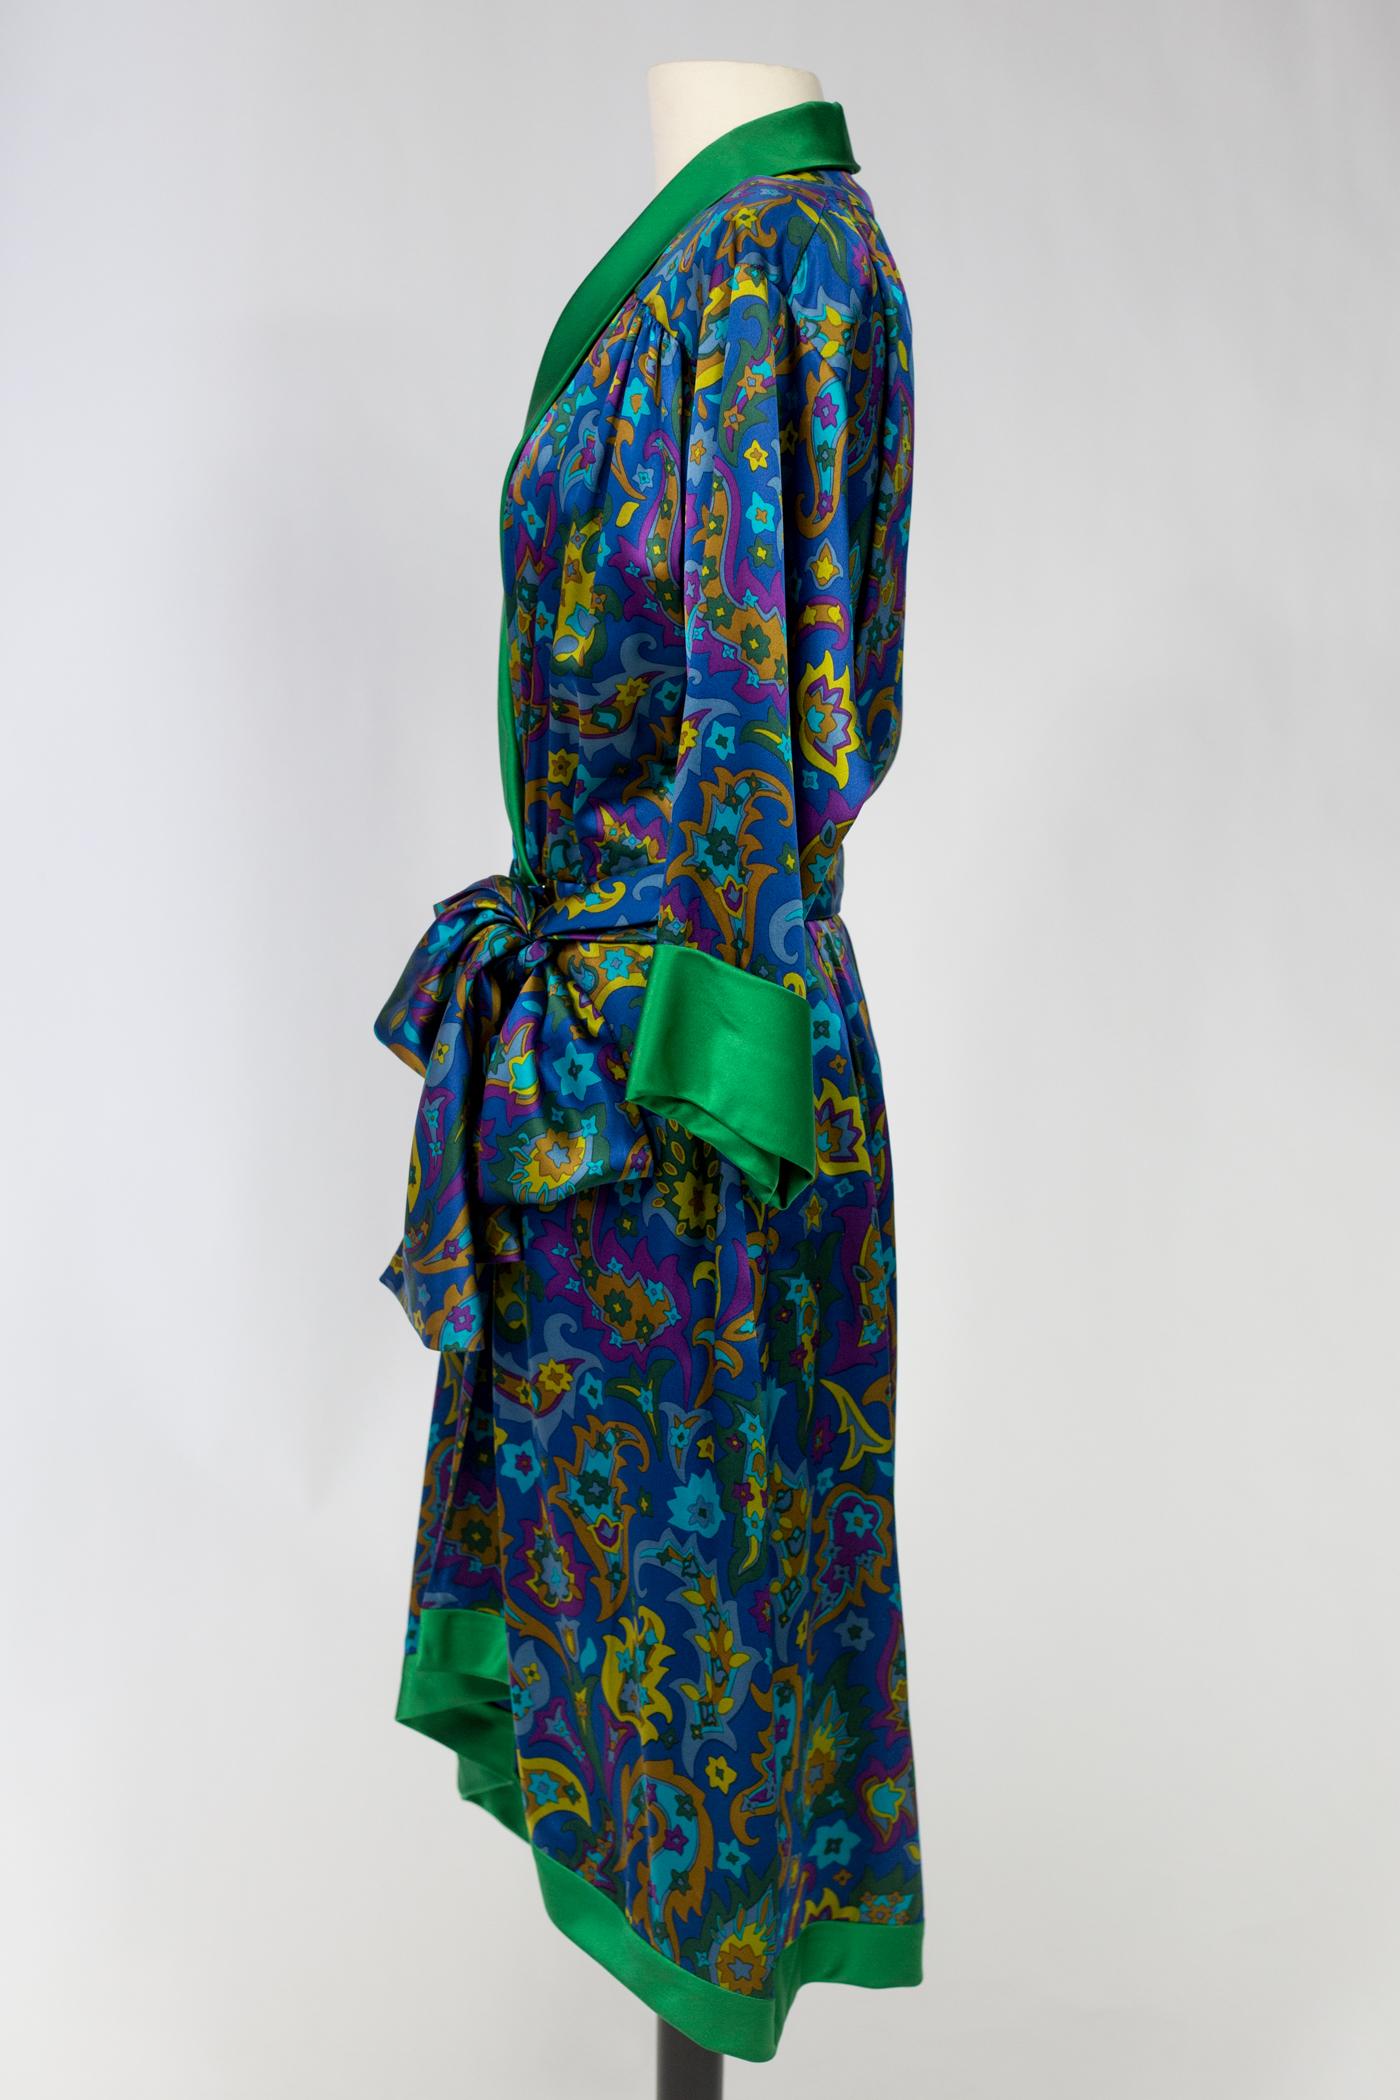 Yves Saint Laurent Rive Gauche cocktail dress in printed satin Fall Winter 1985 For Sale 5